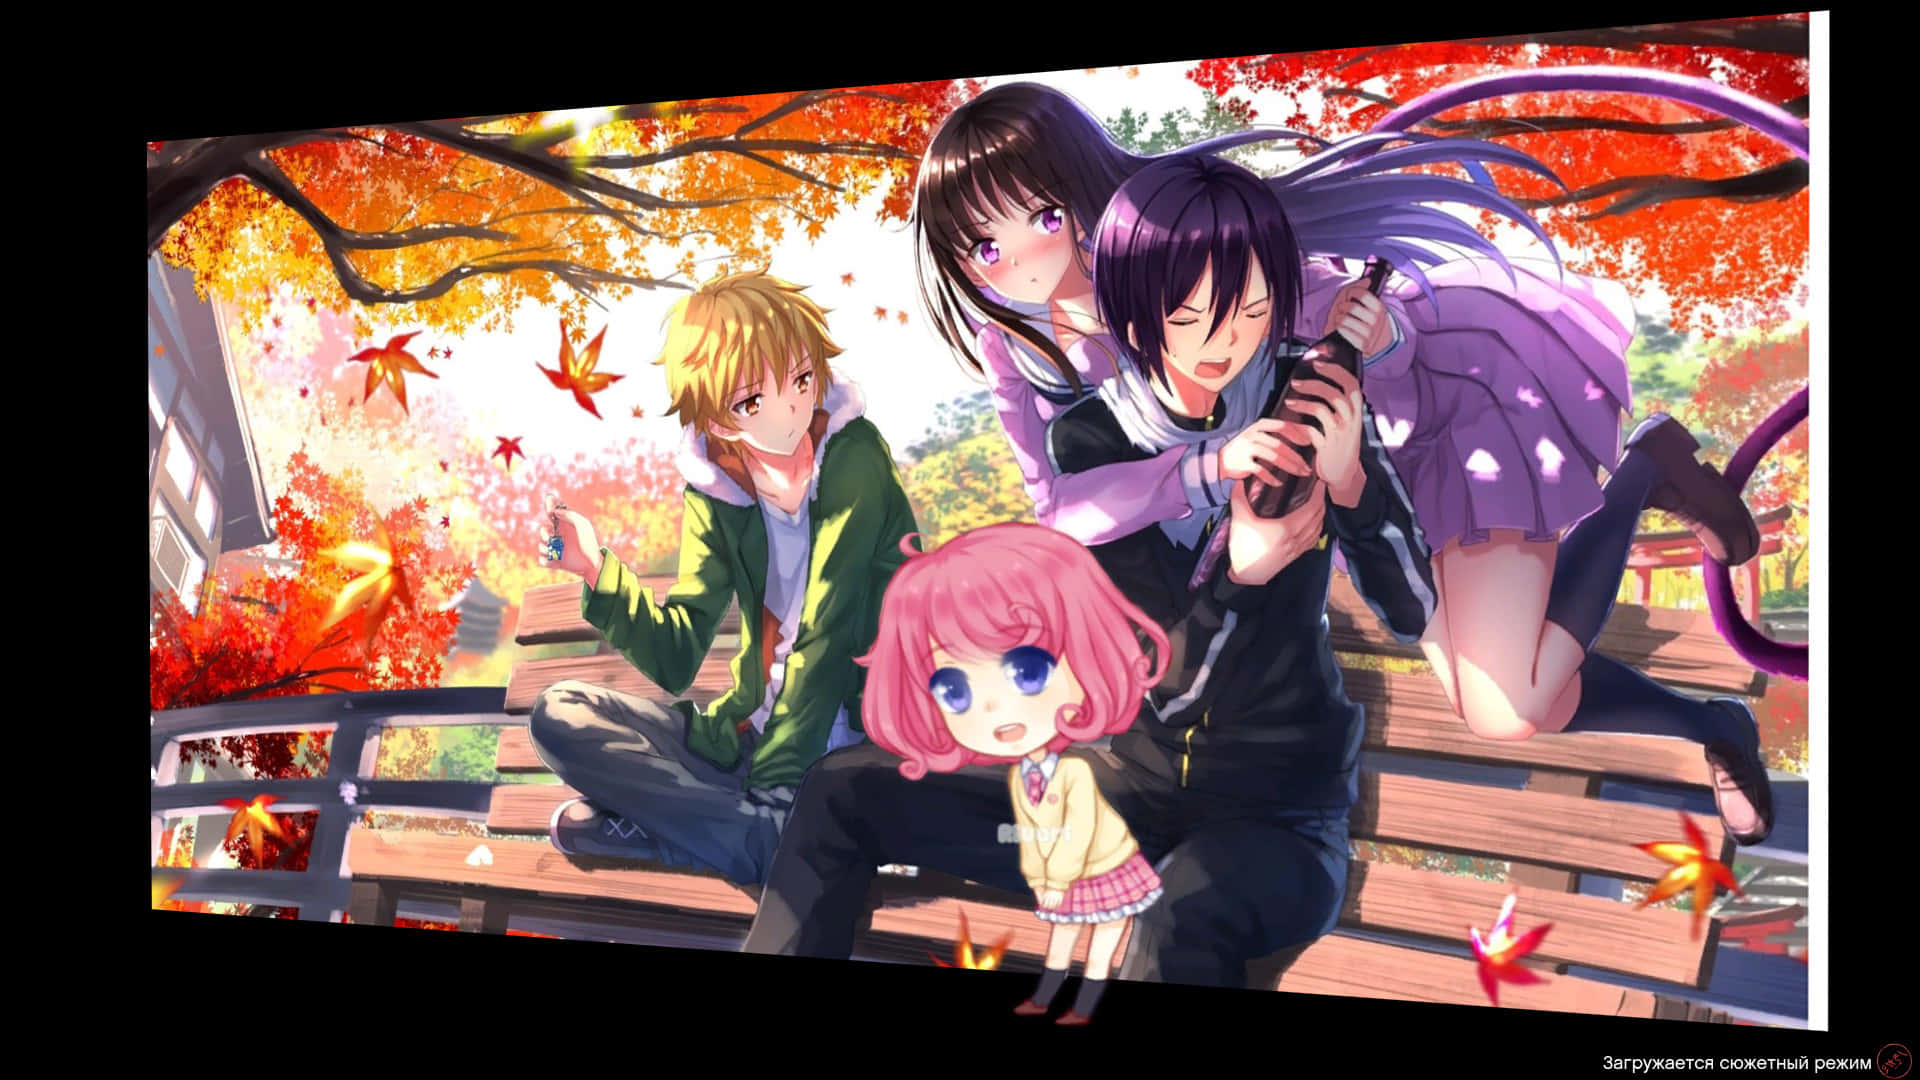 A Poster With Anime Characters On A Bench